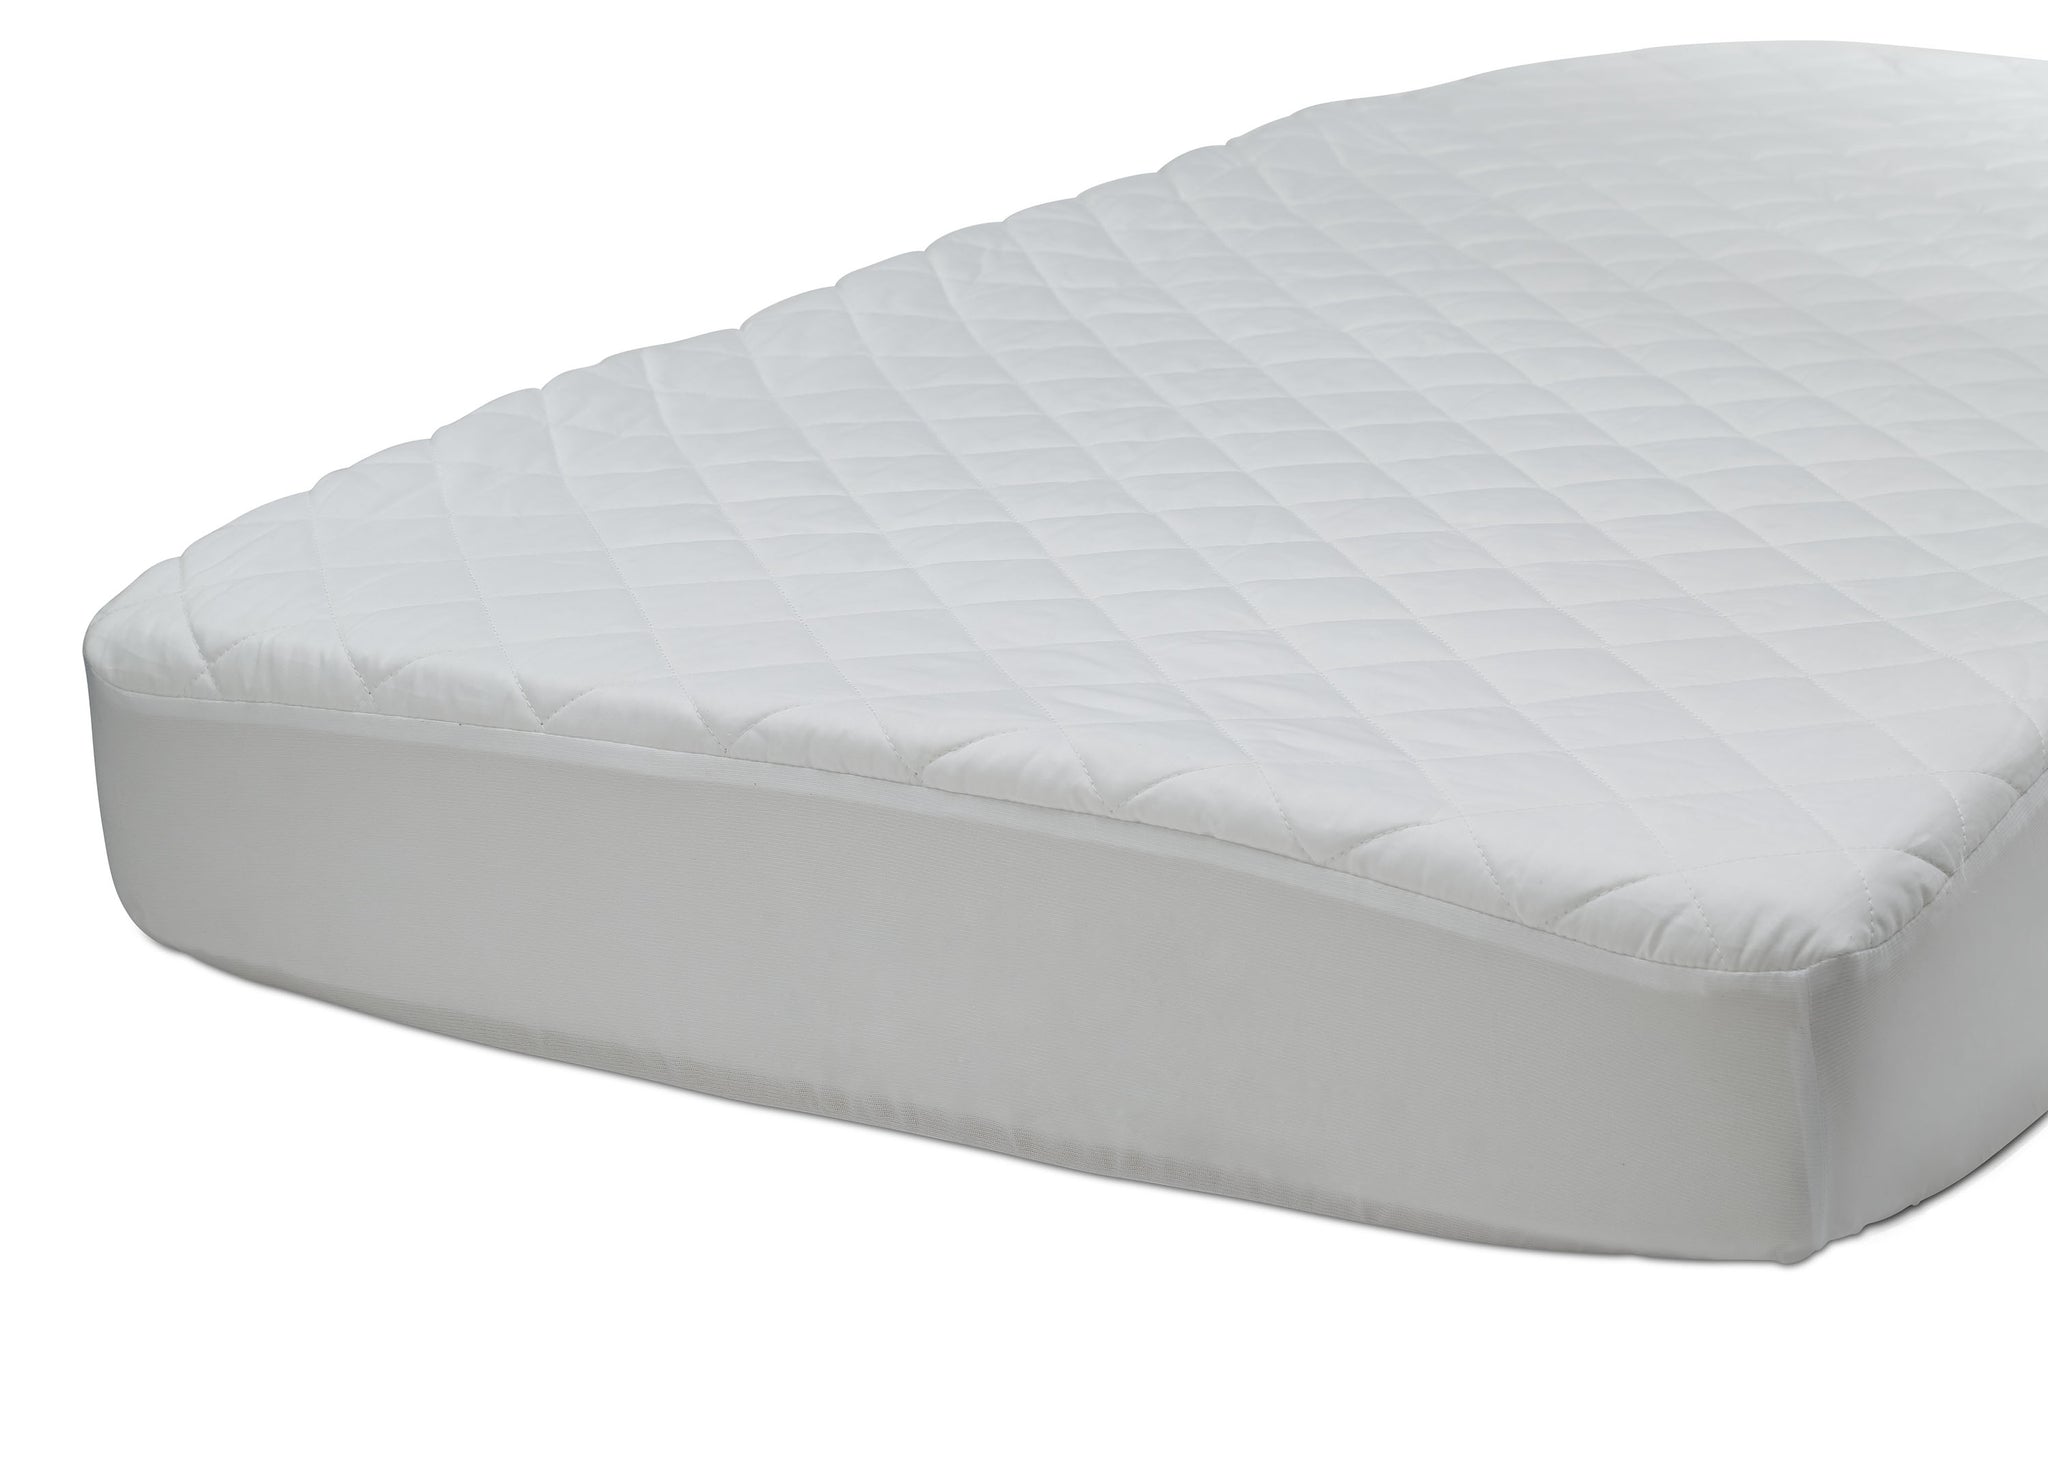 928002-polyester mattress pad cover